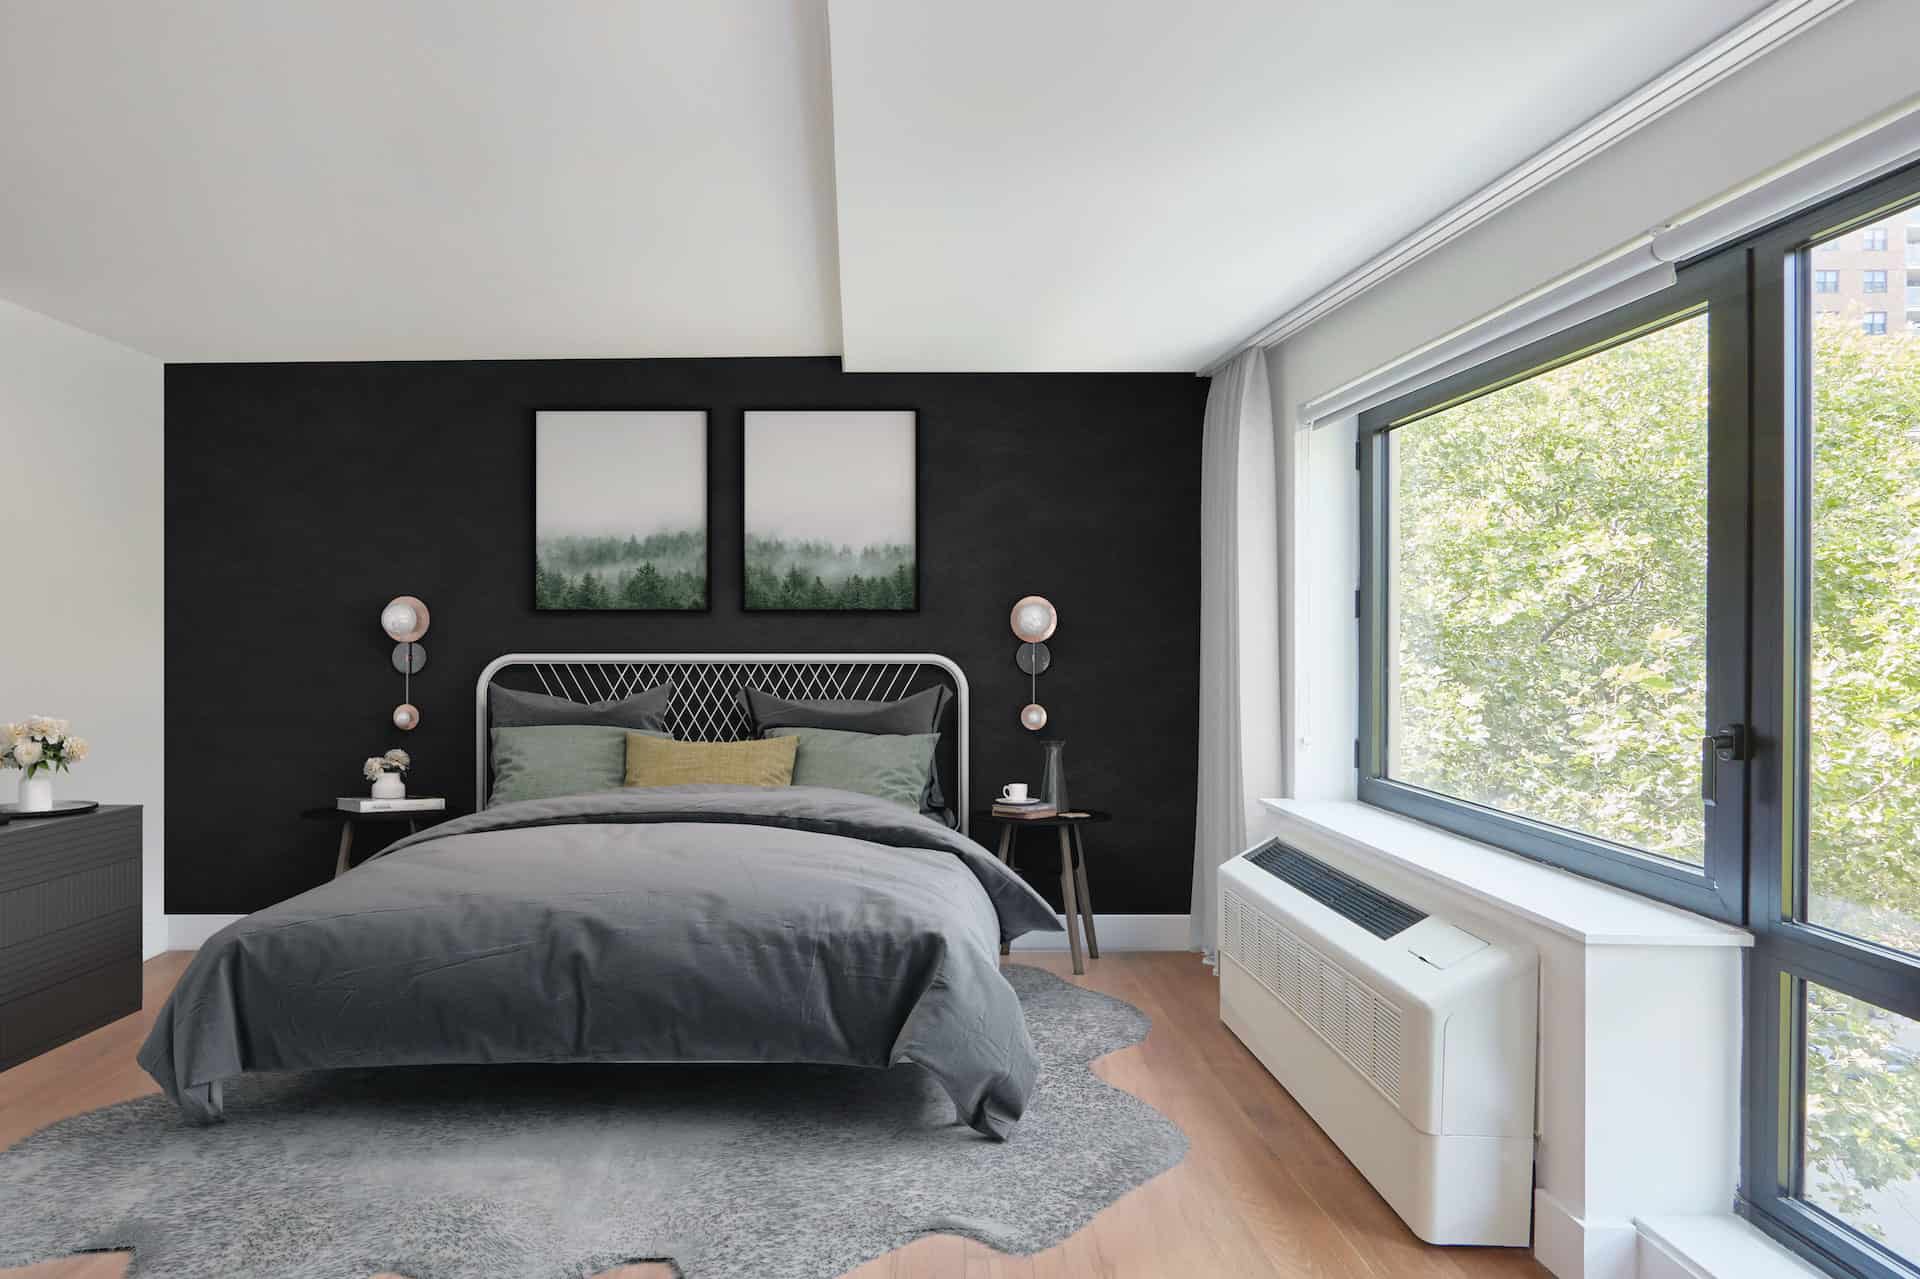 Bedroom at 325 Lafayette Avenue apartments in Brooklyn with hardwood floors, large windows, a queen bed and side tables.